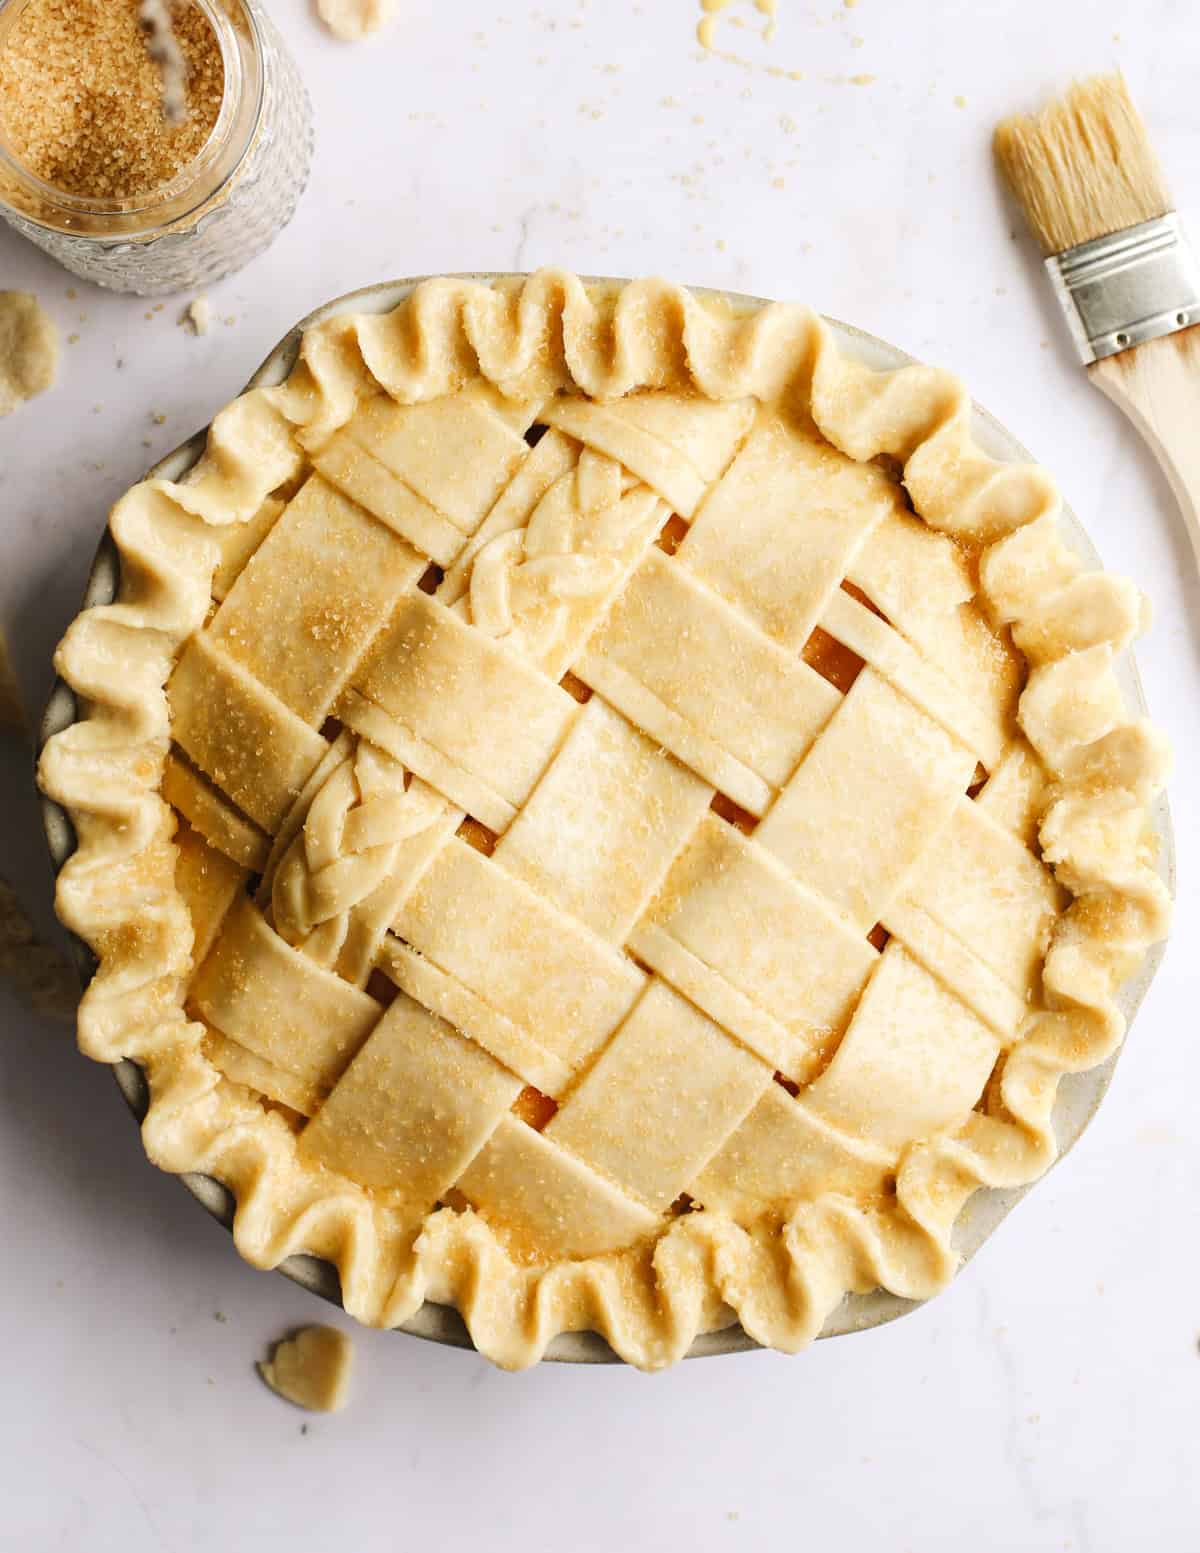 Peach Pie with a lattice crust before being baked